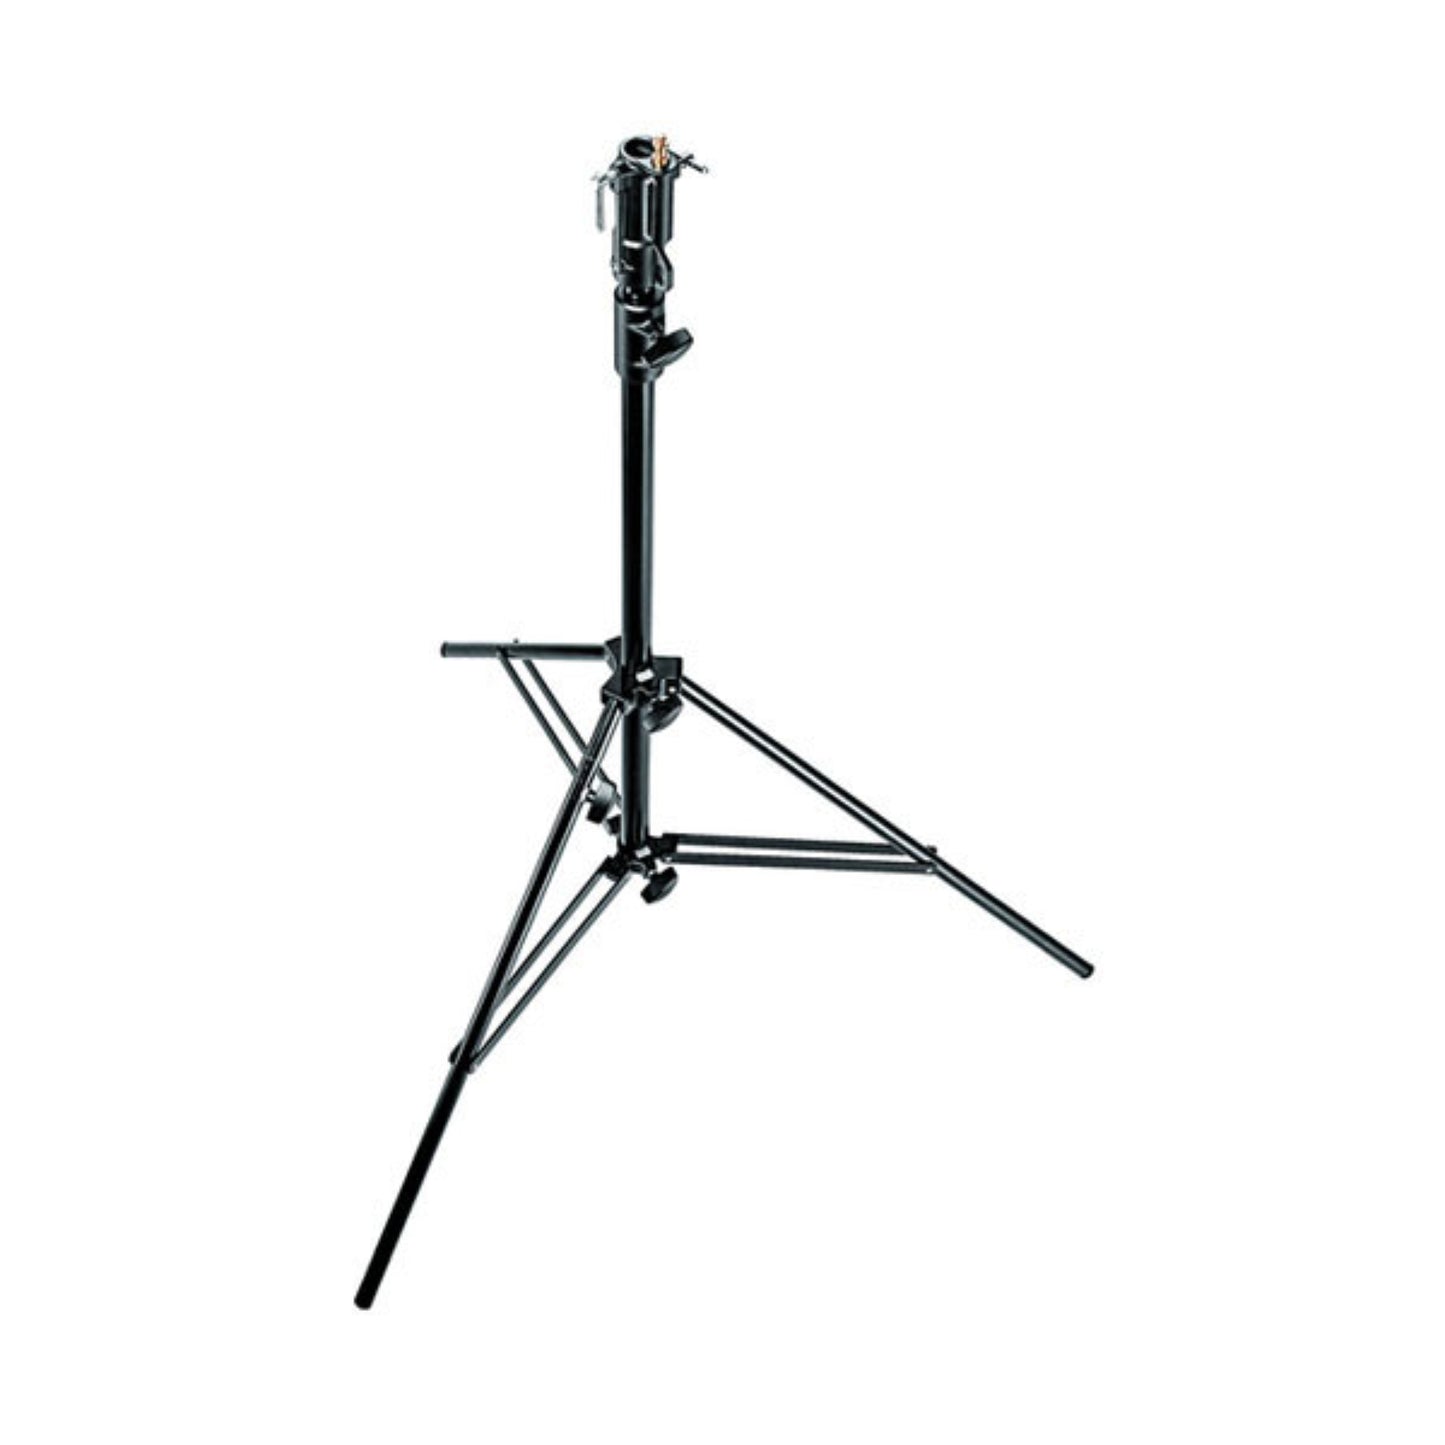 Manfrotto 008 heavy light stand for hire